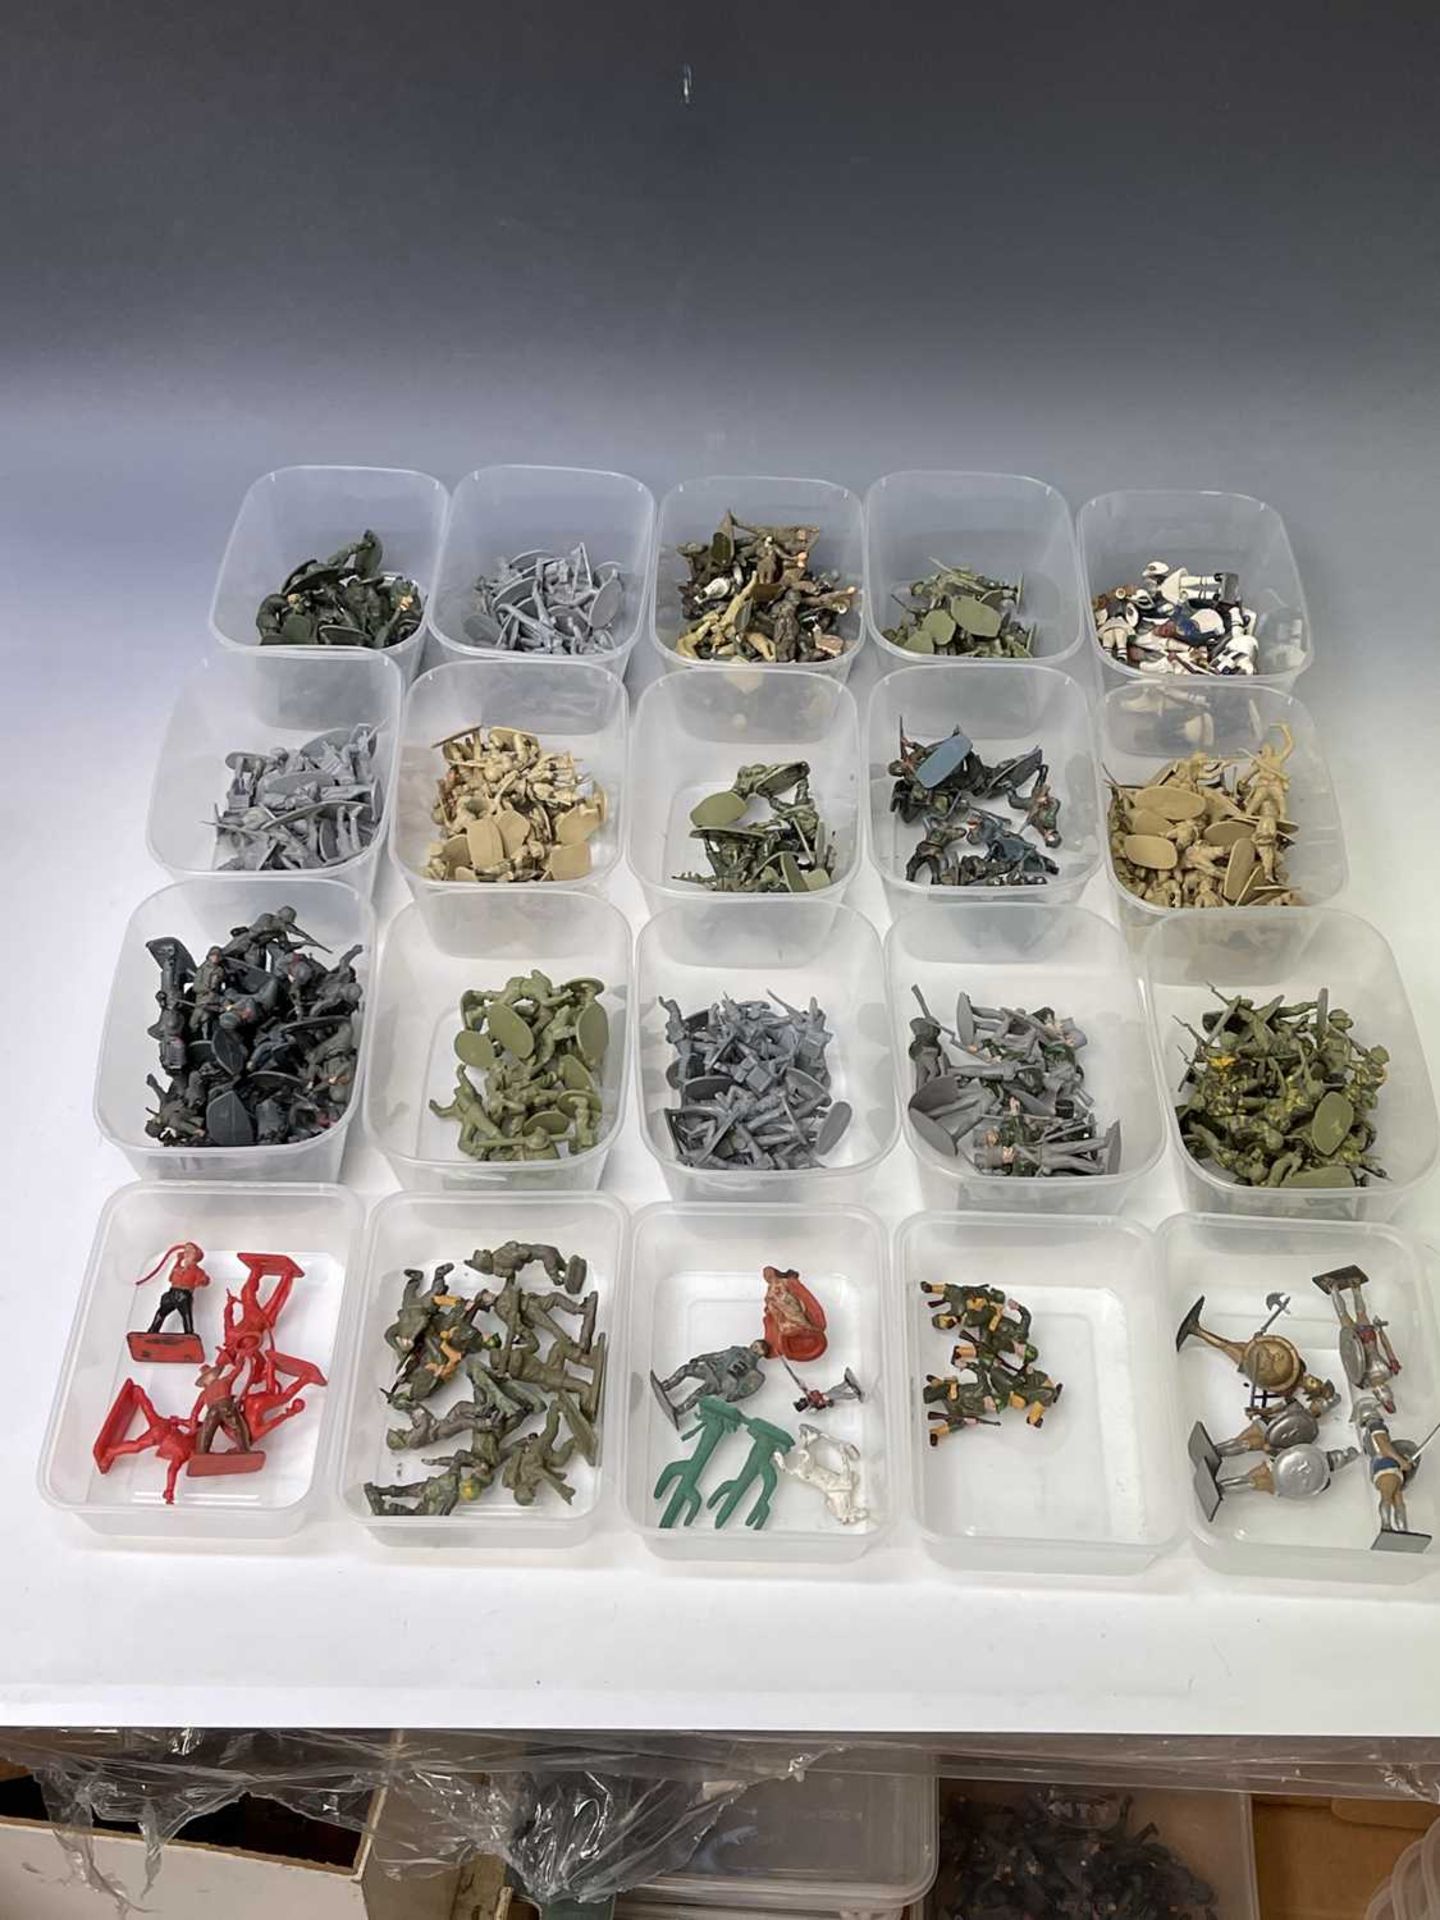 1960s-1980s Plastic Soldiers. Large quantity of mostly Airfix figures sorted into containers - WWII,